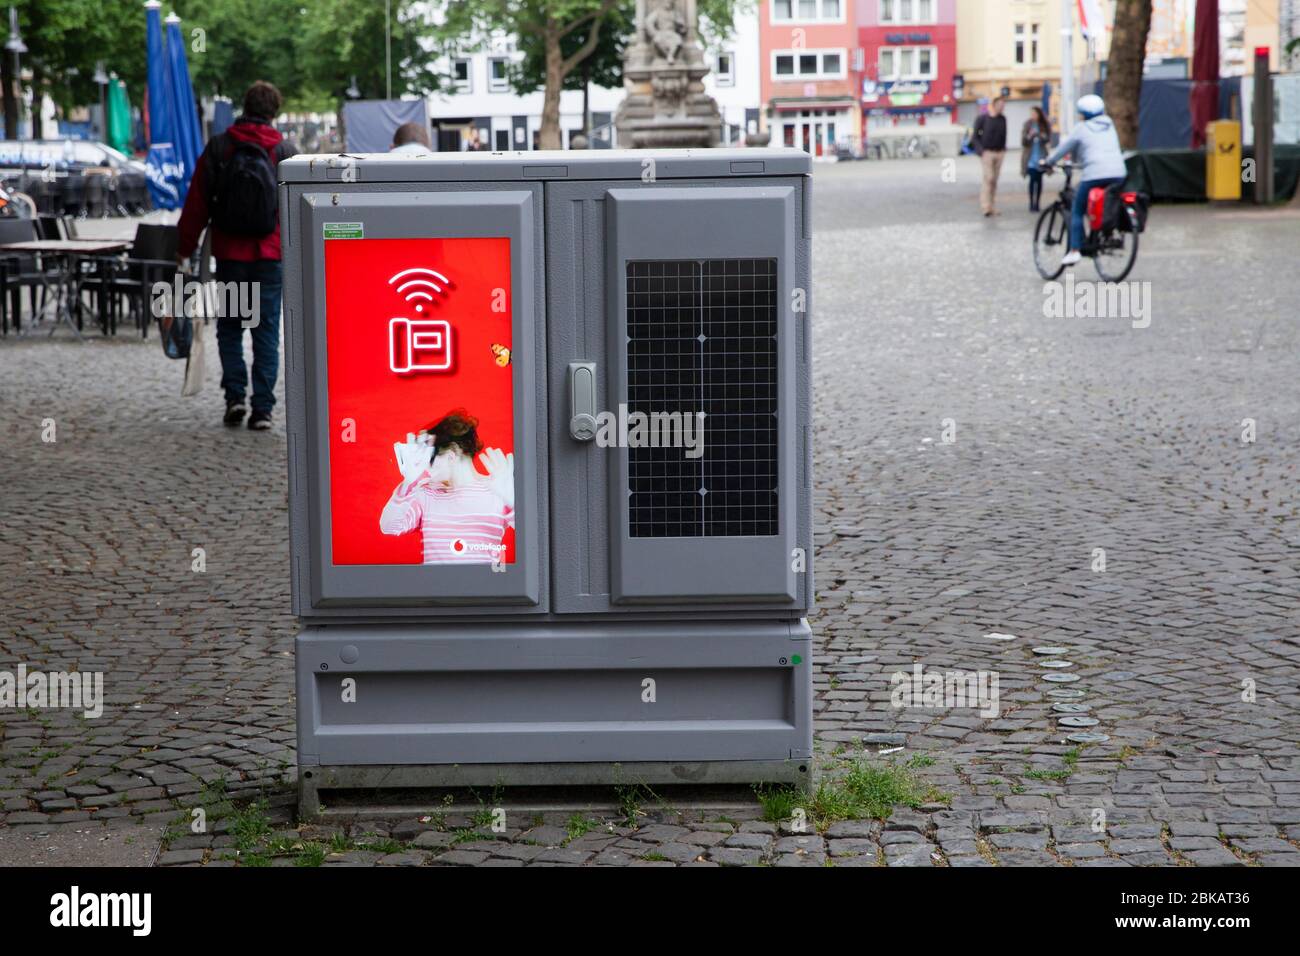 digital display for advertising and solar module on a switch cabinet at Alter Markt, Cologne, Germany.  digitales Display fuer Werbung und Solarmodul Stock Photo